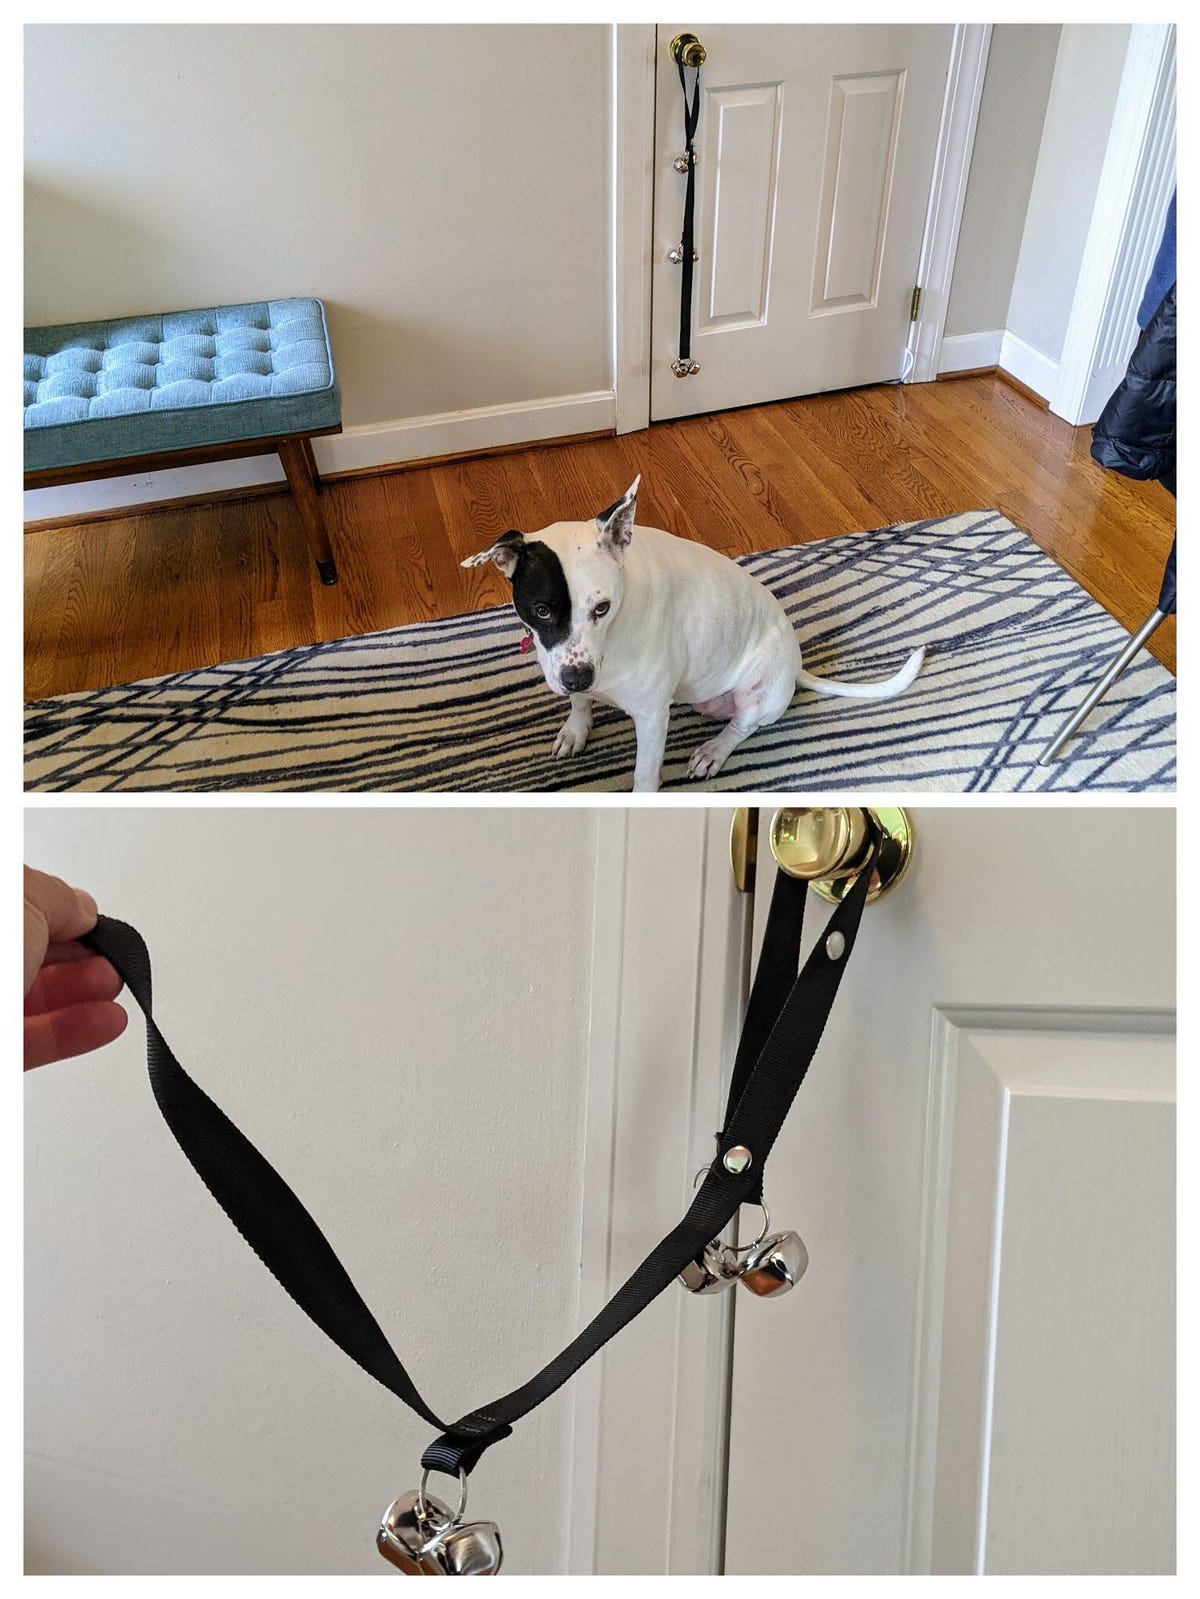 A dog and a cloth strap with bells on it that hangs from the knob on the door